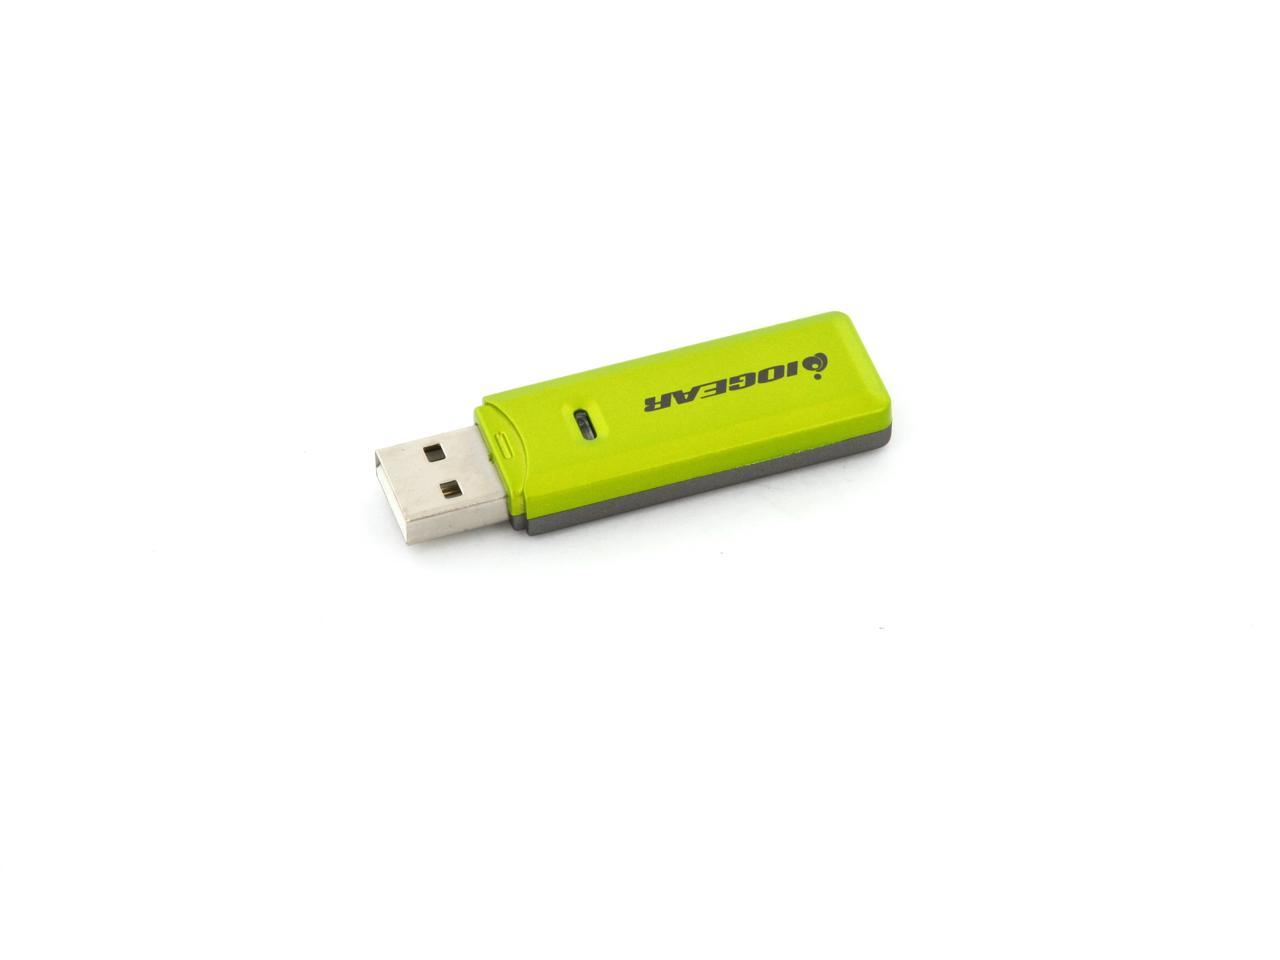 BIN USB20 Memory Card Reader Writer Adapter for MMC/SD/SDHC UP To 64GB 